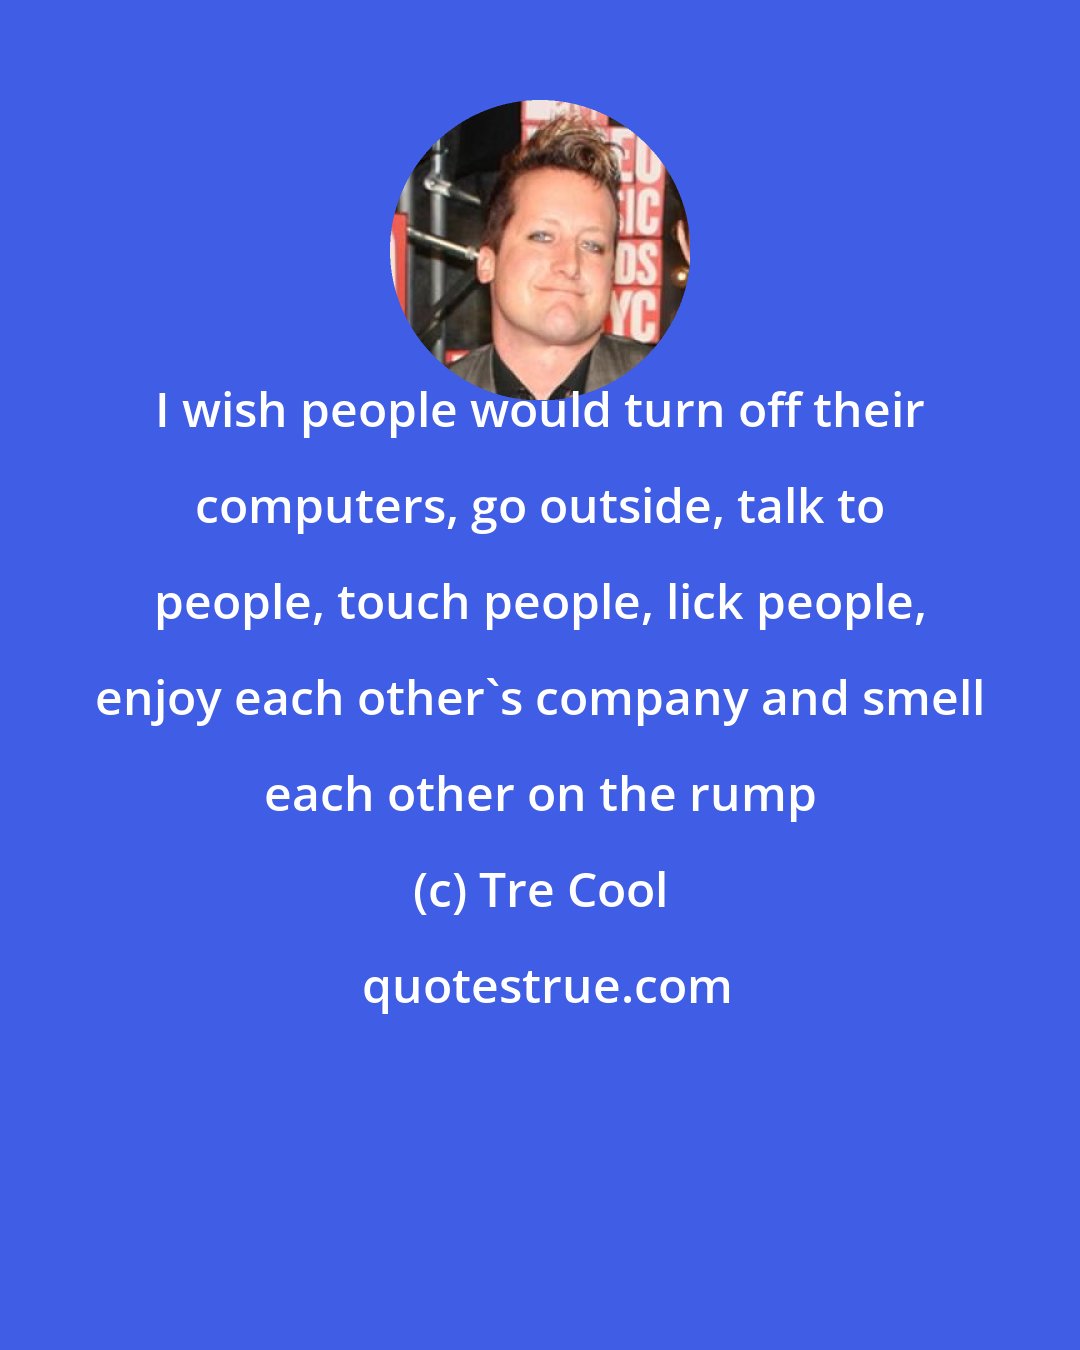 Tre Cool: I wish people would turn off their computers, go outside, talk to people, touch people, lick people, enjoy each other's company and smell each other on the rump